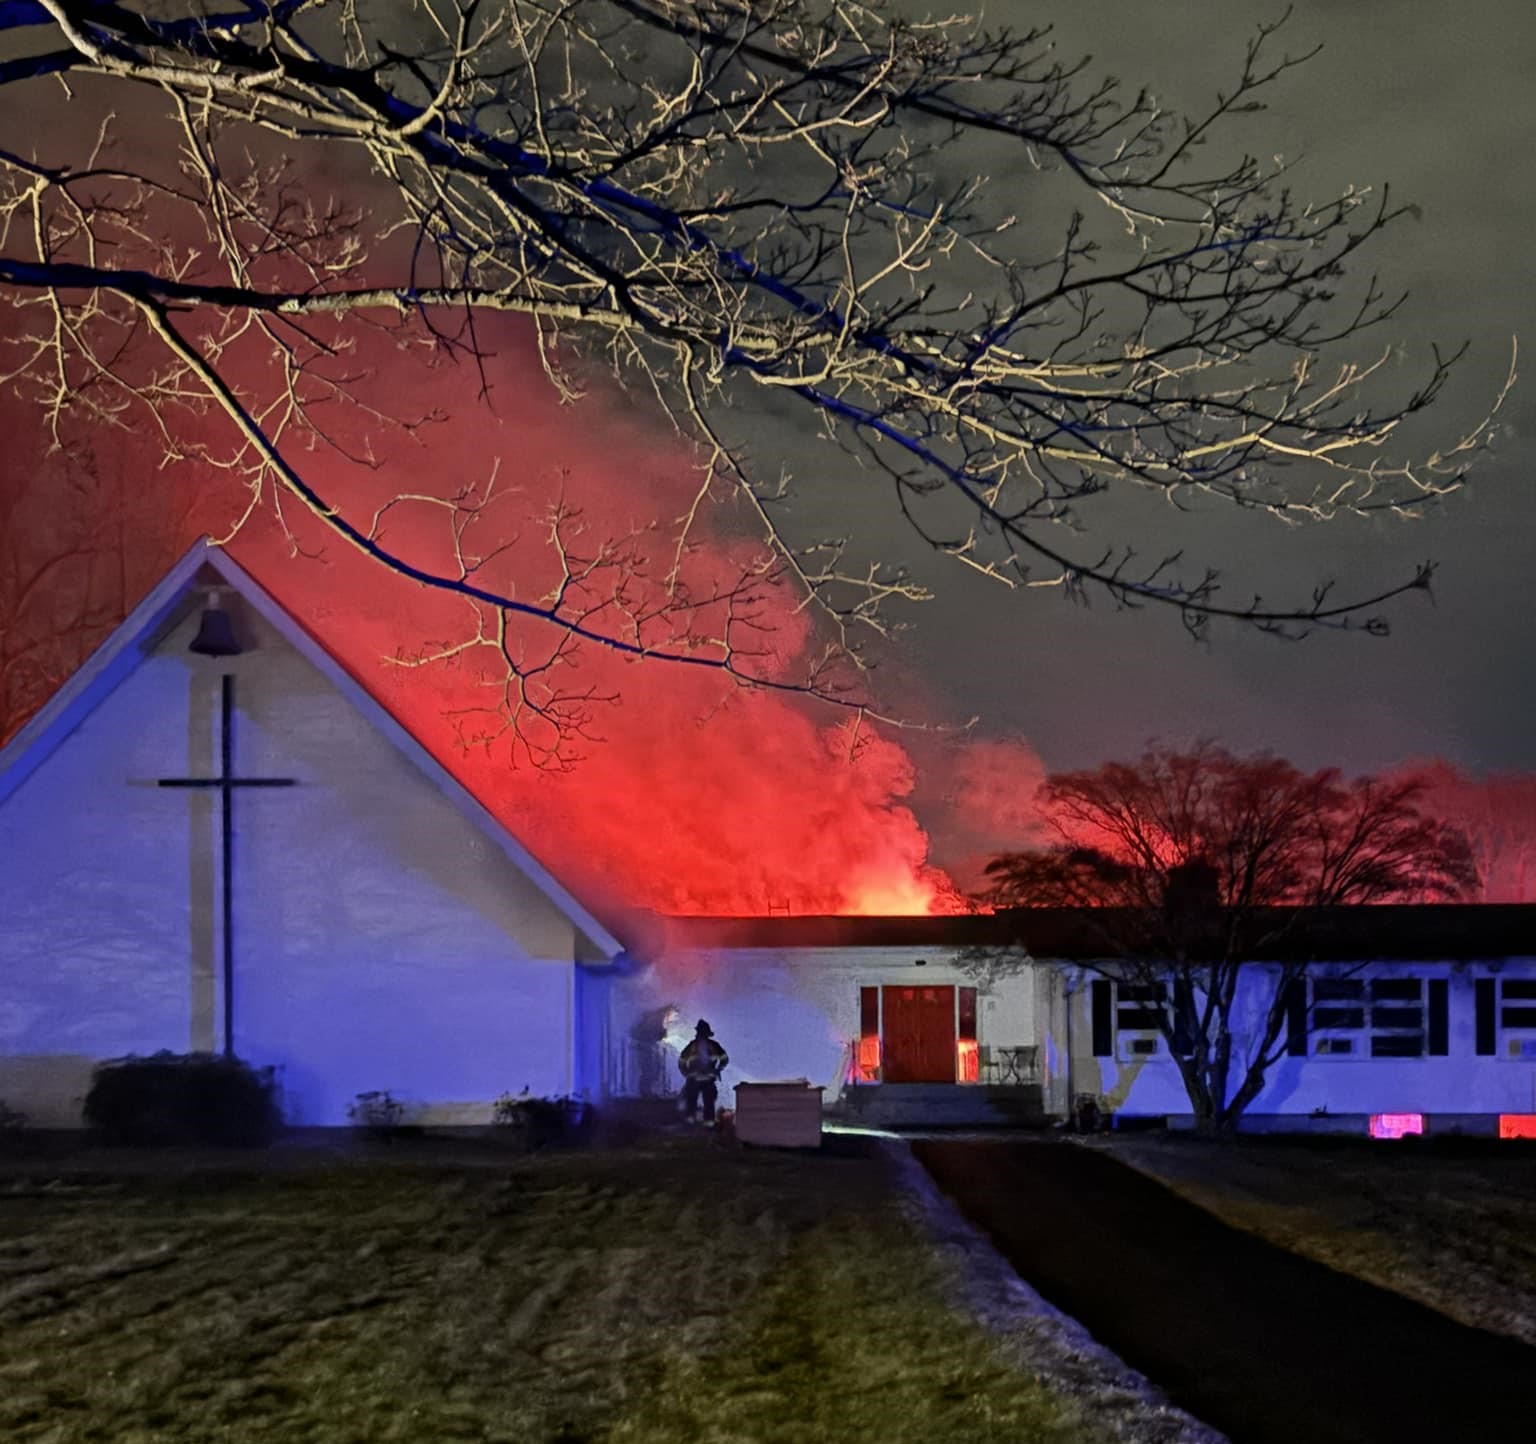 Quick work by firefighters saves church in Northborough